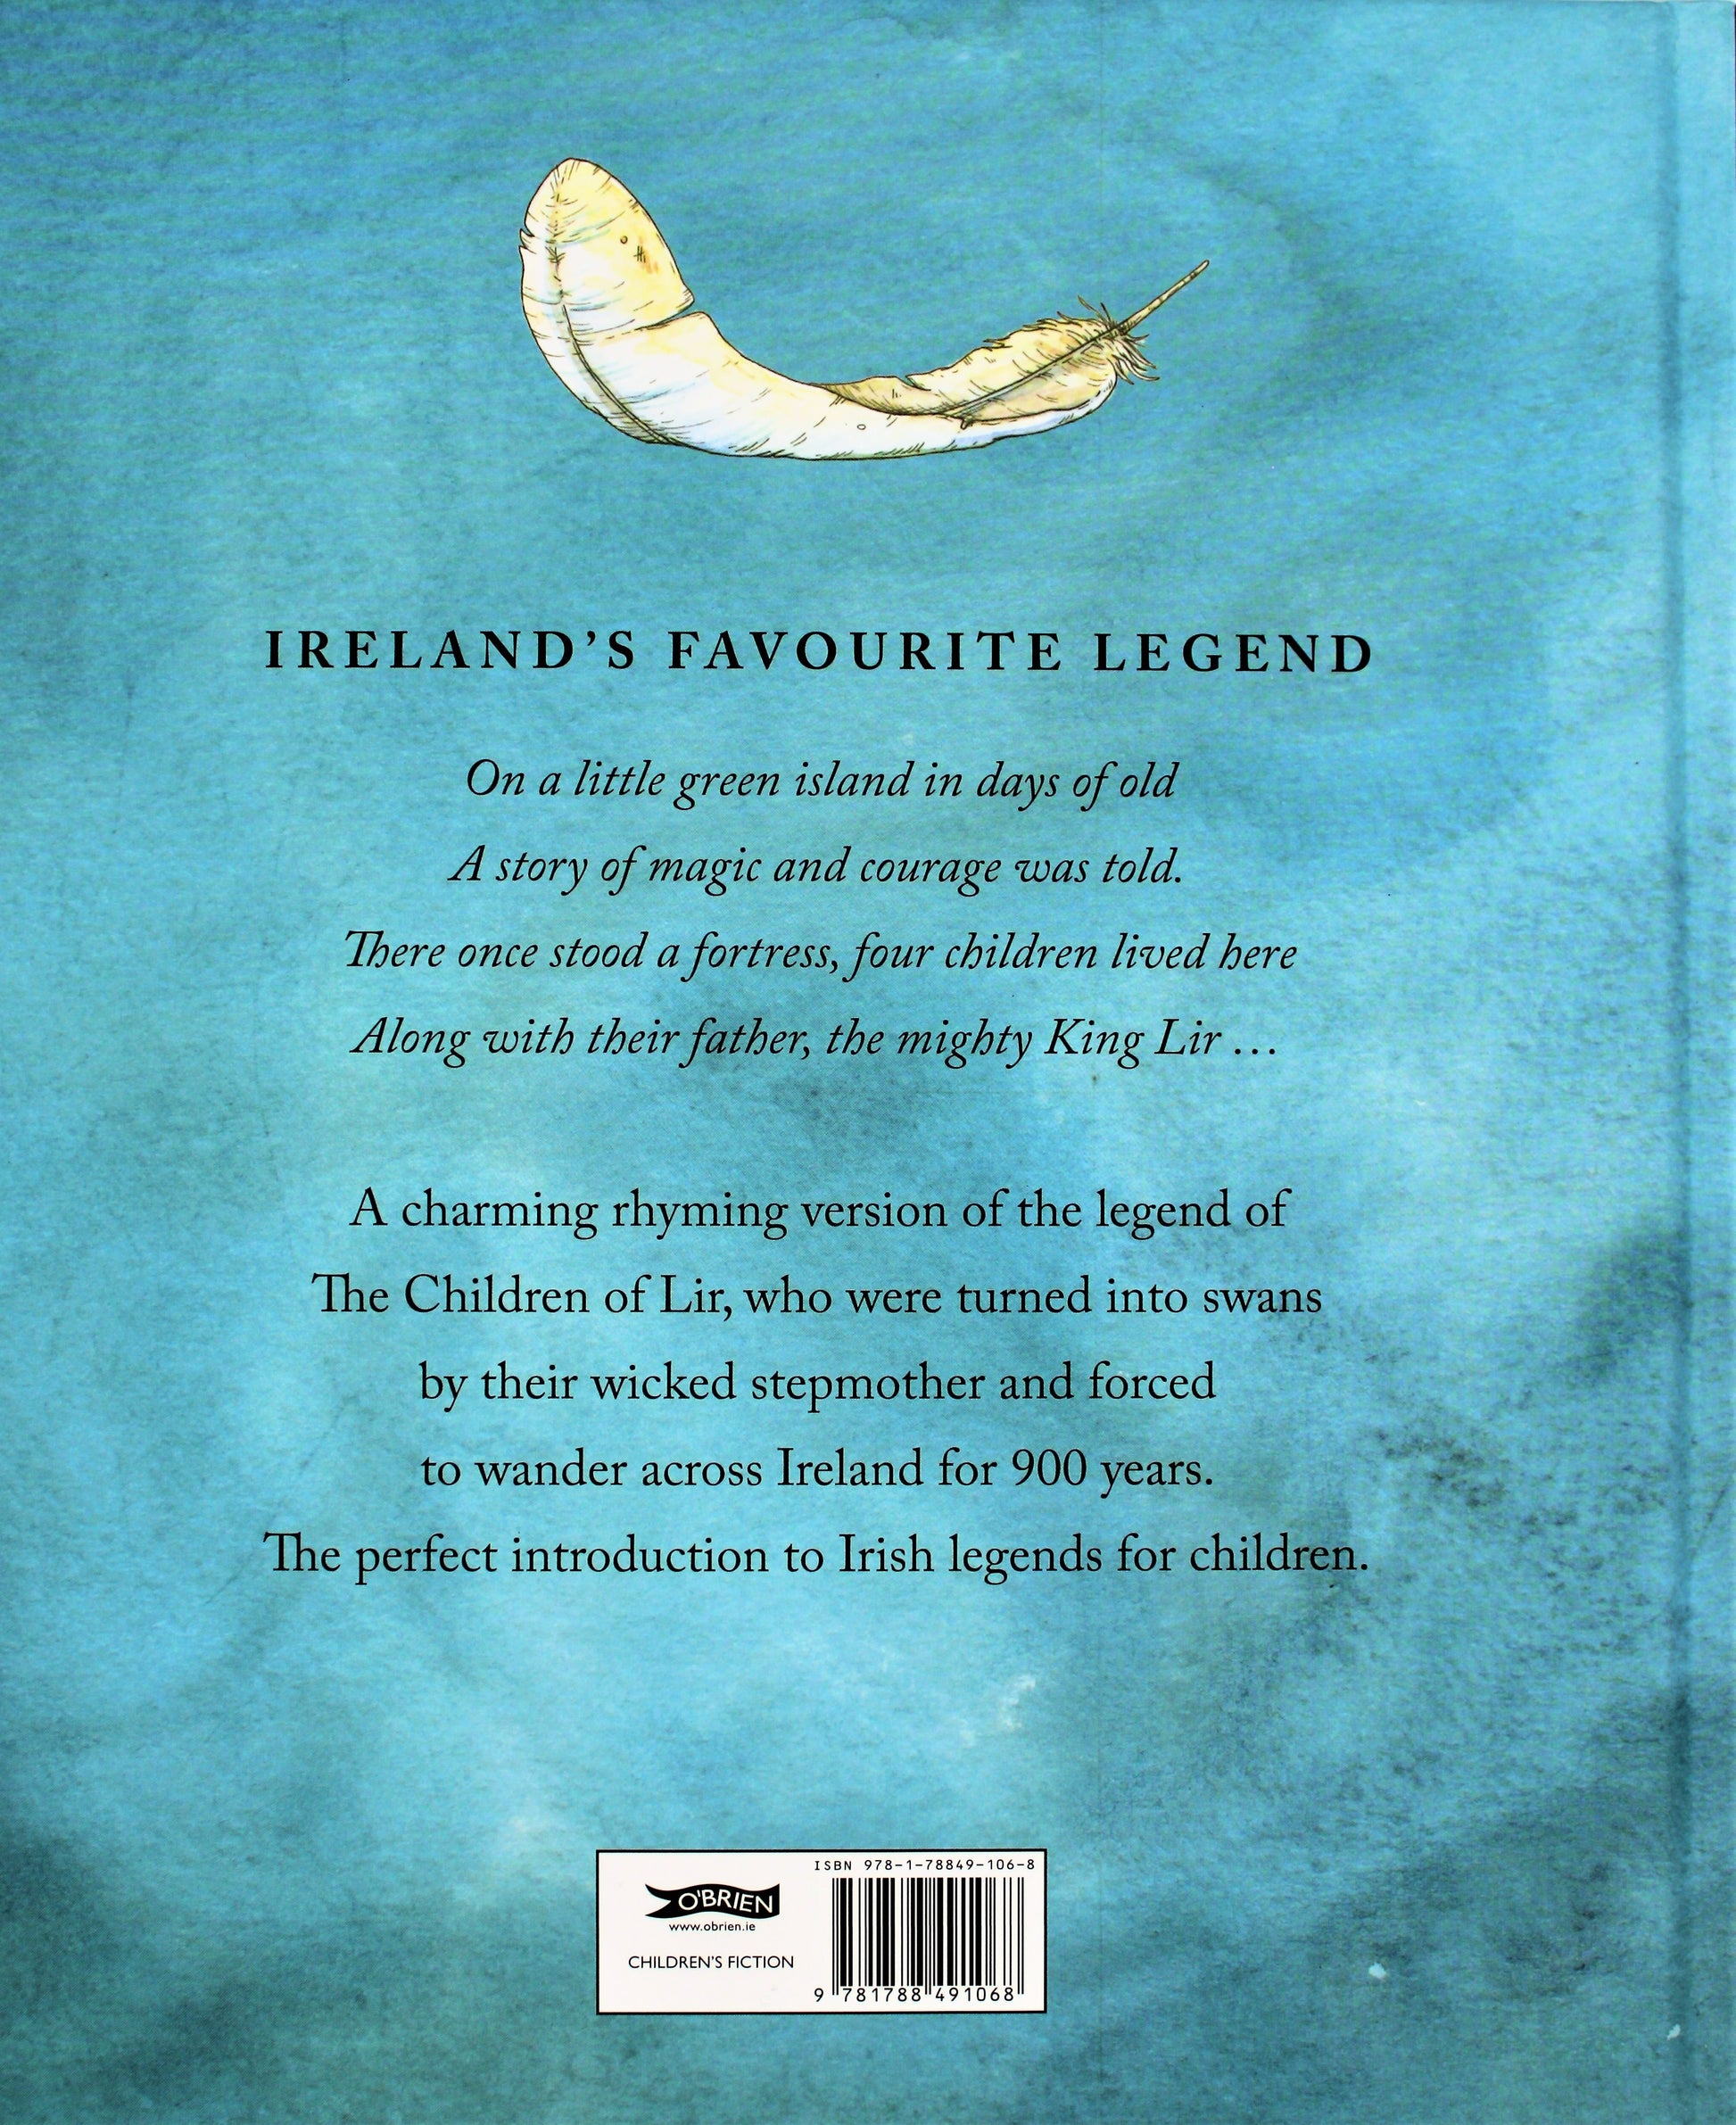 Back Cover of Children of Lir Picture Book